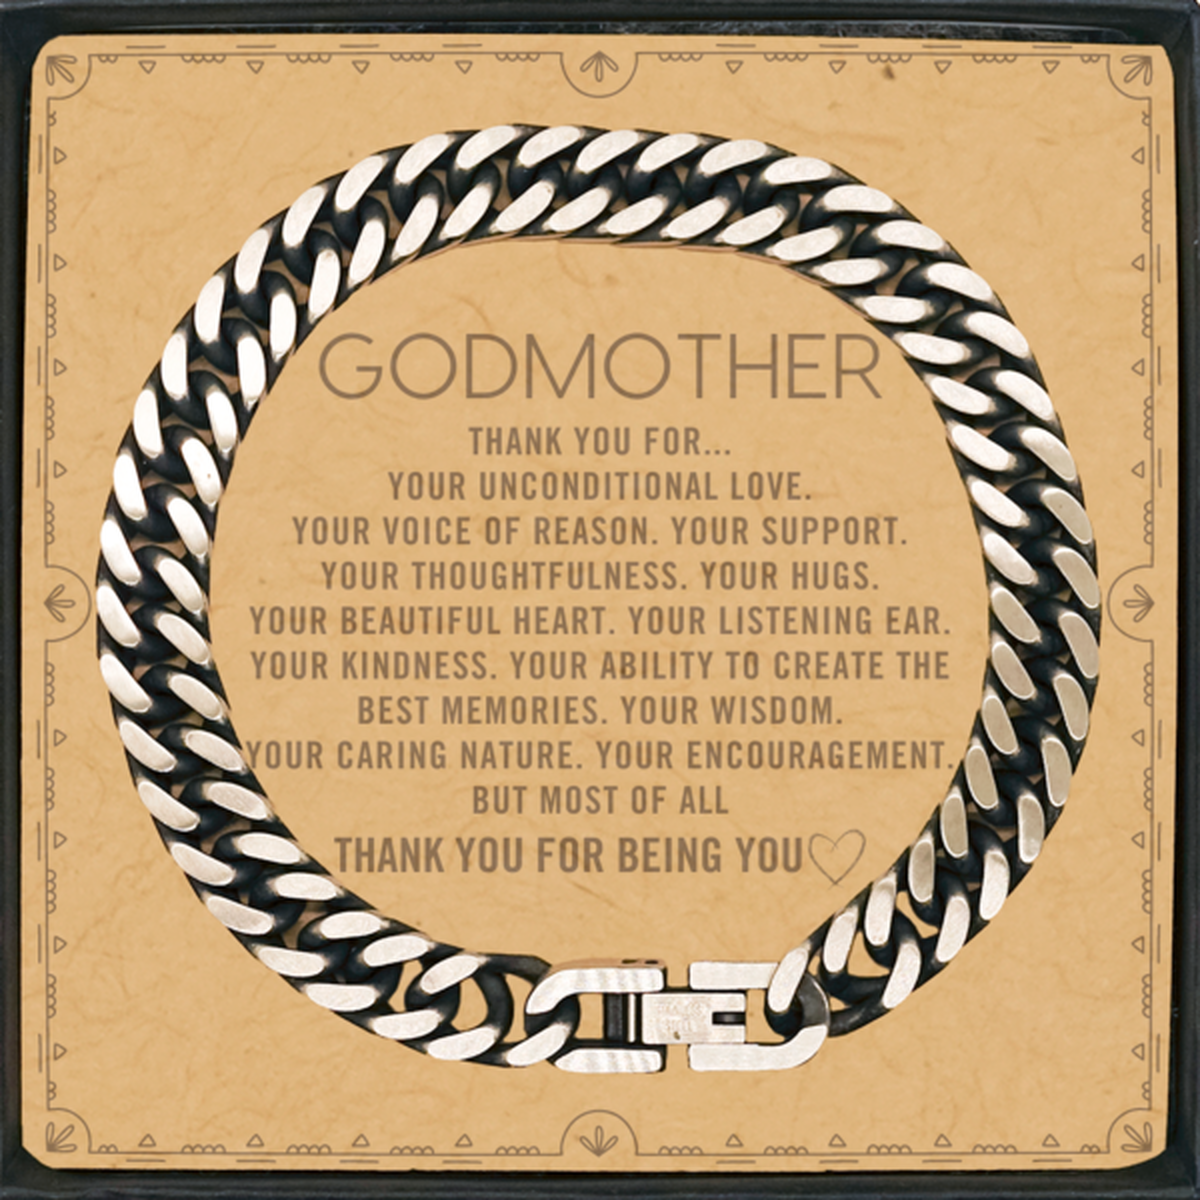 Godmother Cuban Link Chain Bracelet Custom, Message Card Gifts For Godmother Christmas Graduation Birthday Gifts for Men Women Godmother Thank you for Your unconditional love